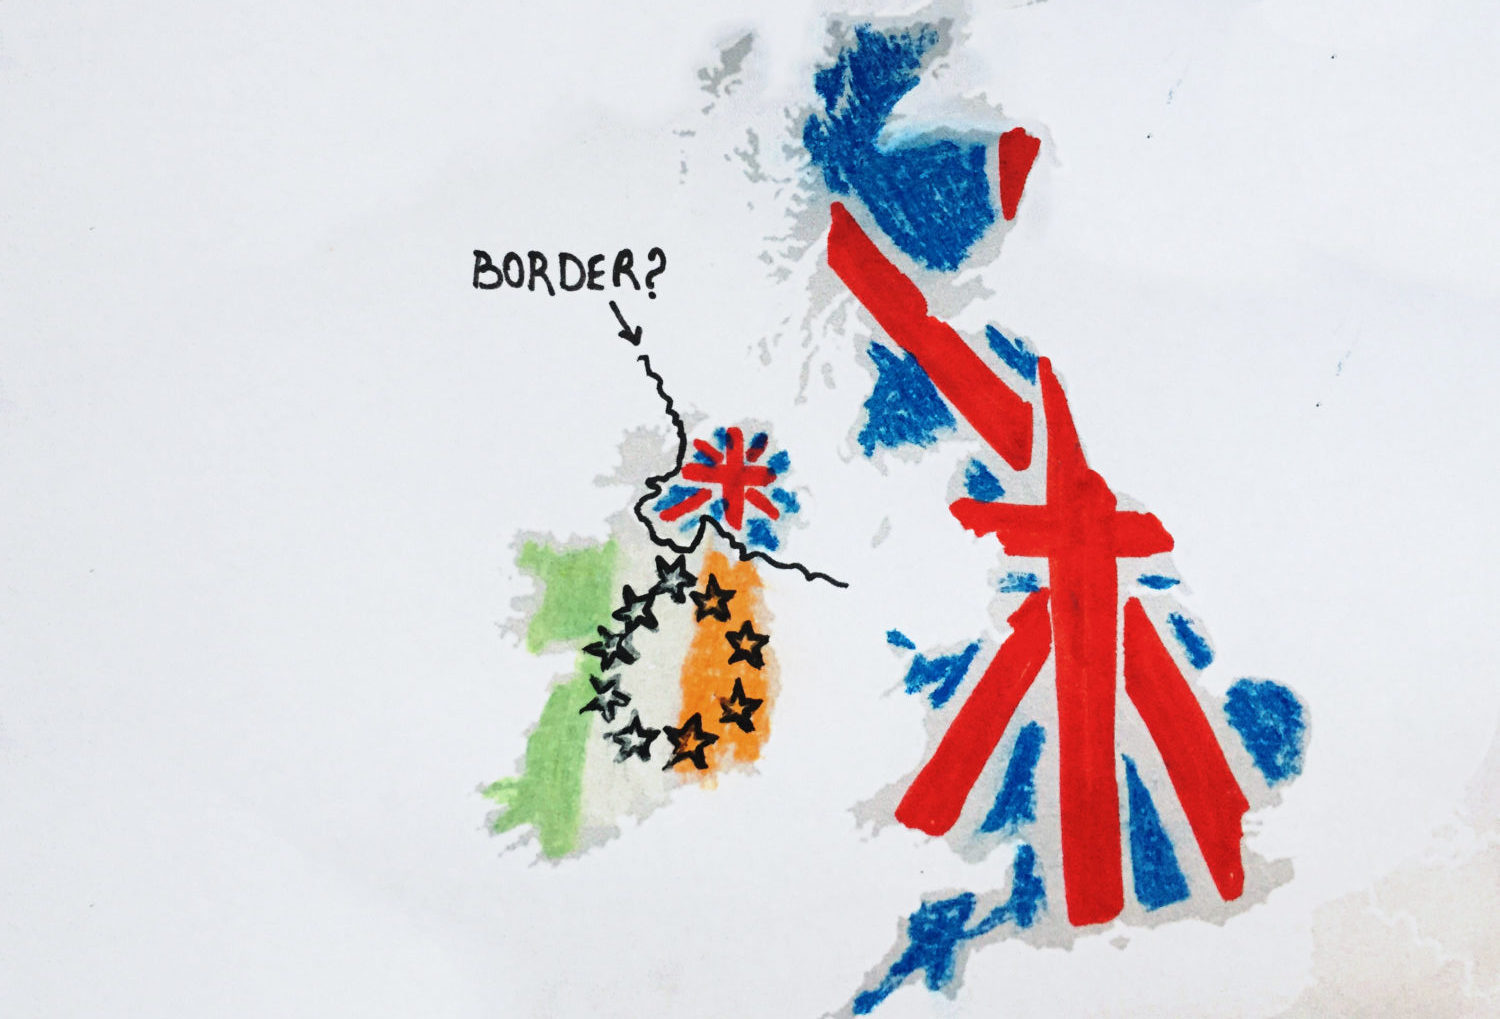 Handdrawn map of Ireland and Northern Ireland with the border